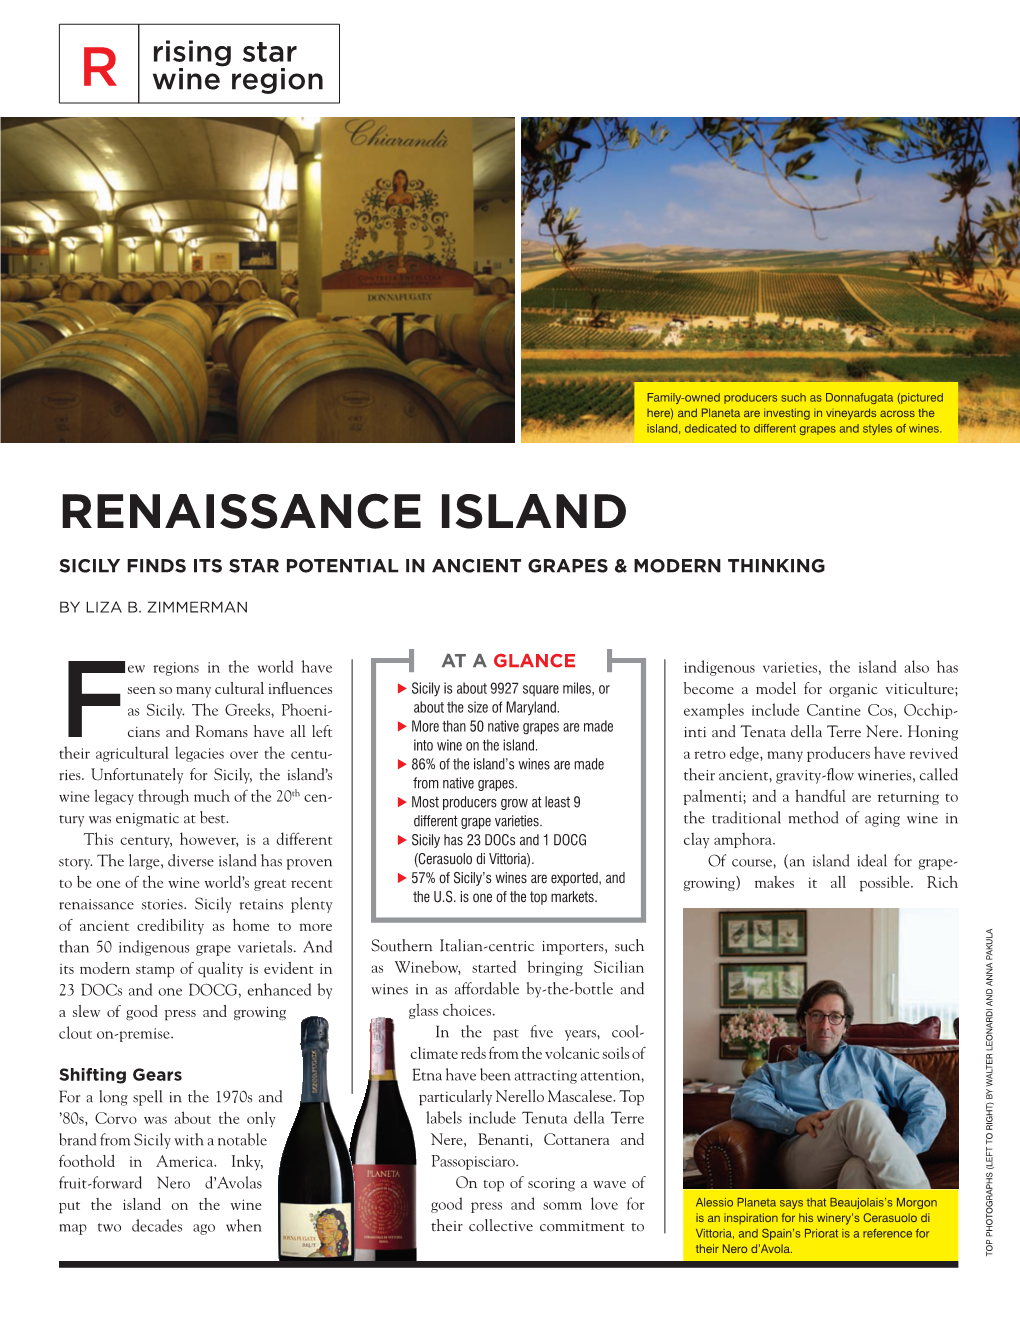 Renaissance Island Sicily Finds Its Star Potential in Ancient Grapes & Modern Thinking